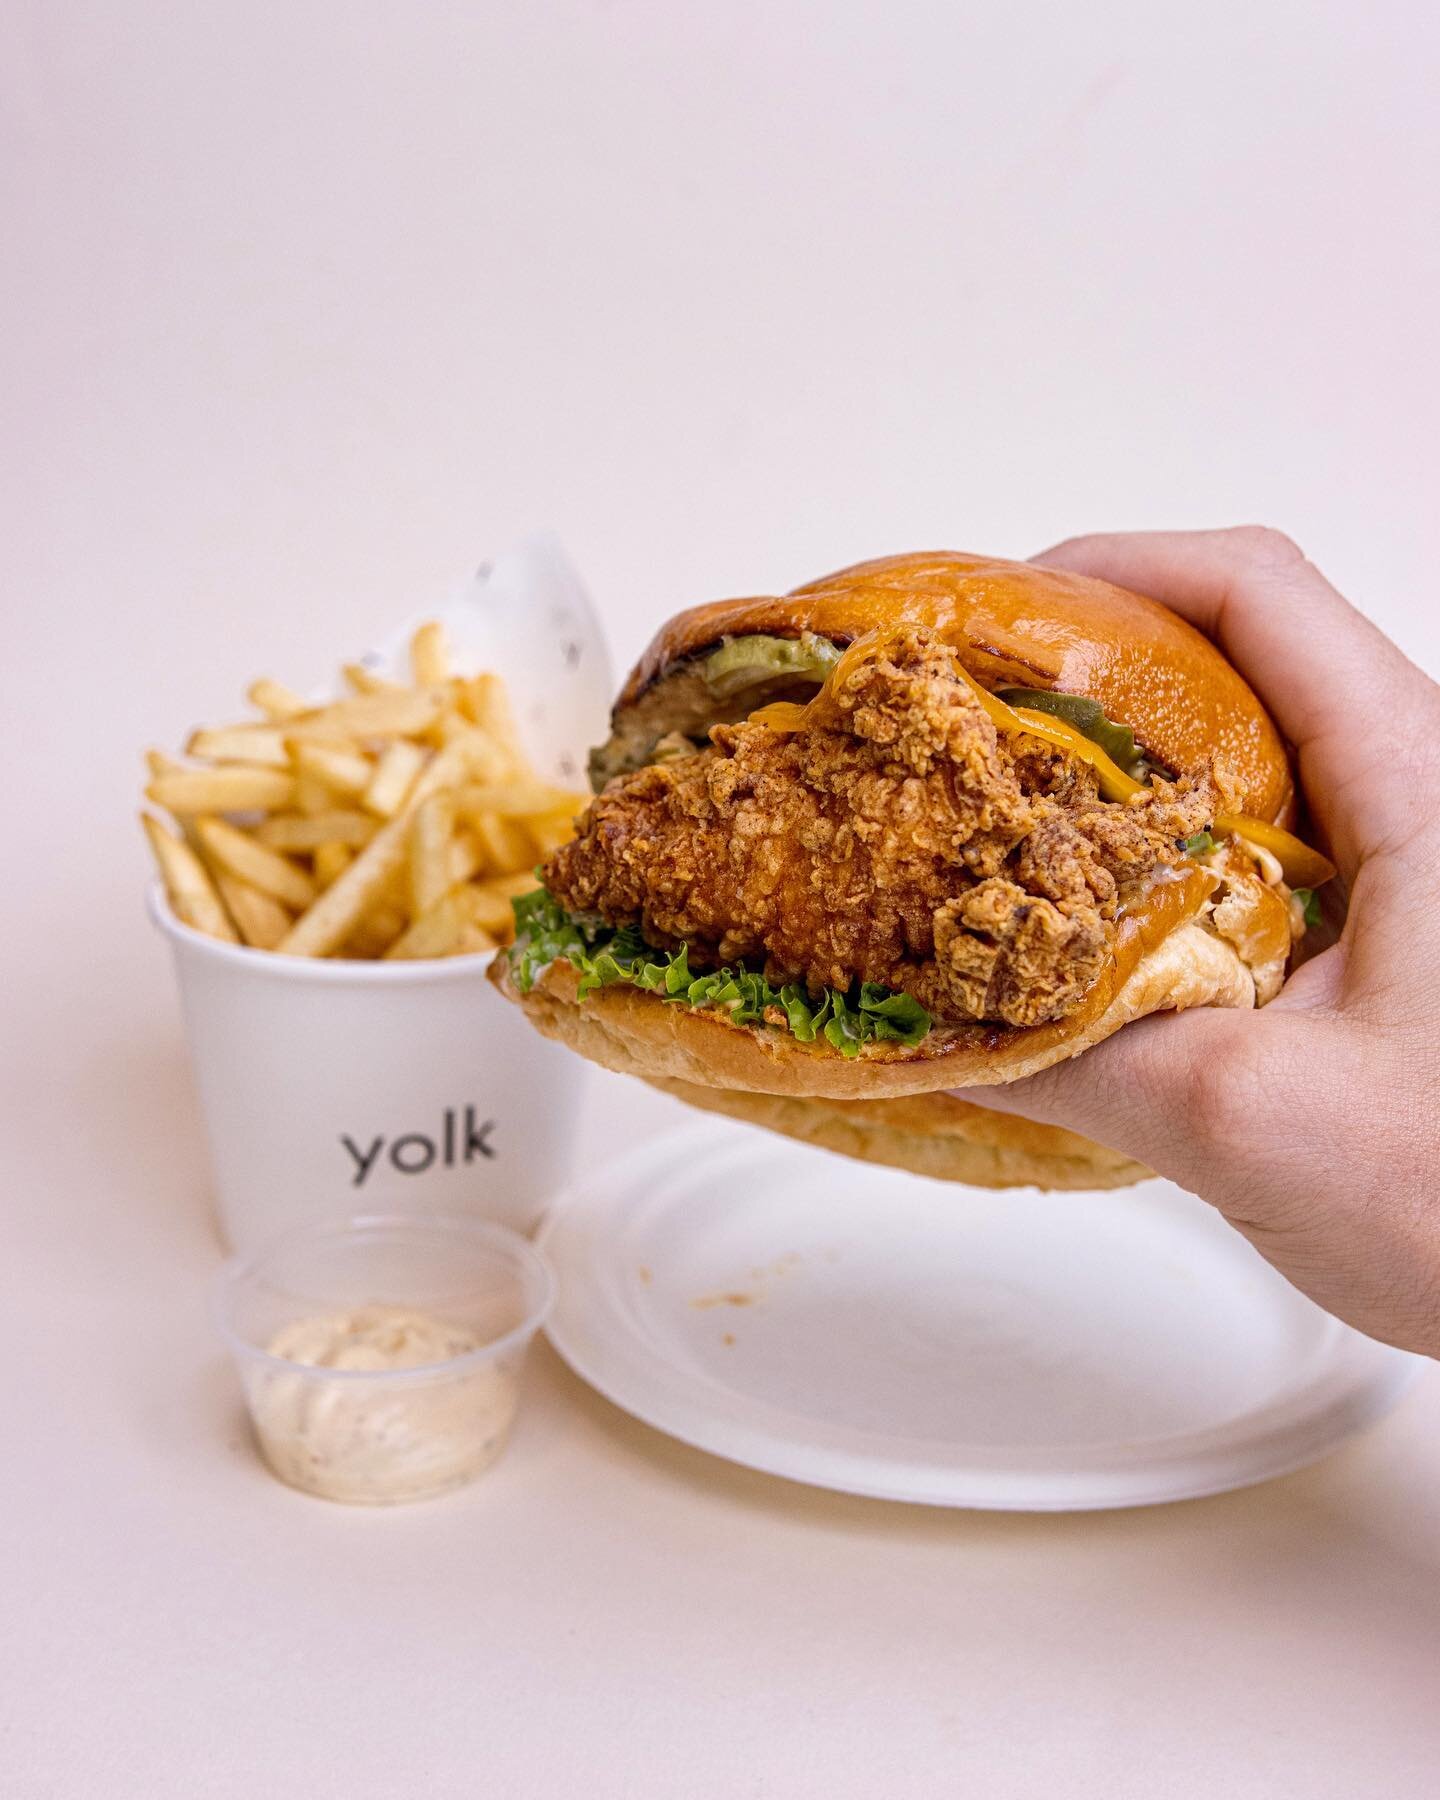 Some people say it has more taste than weet-bix, some people say it has more hits than Elvis, some people say it&rsquo;s just a f*ken good burger 🐥
#yolk #brisbane